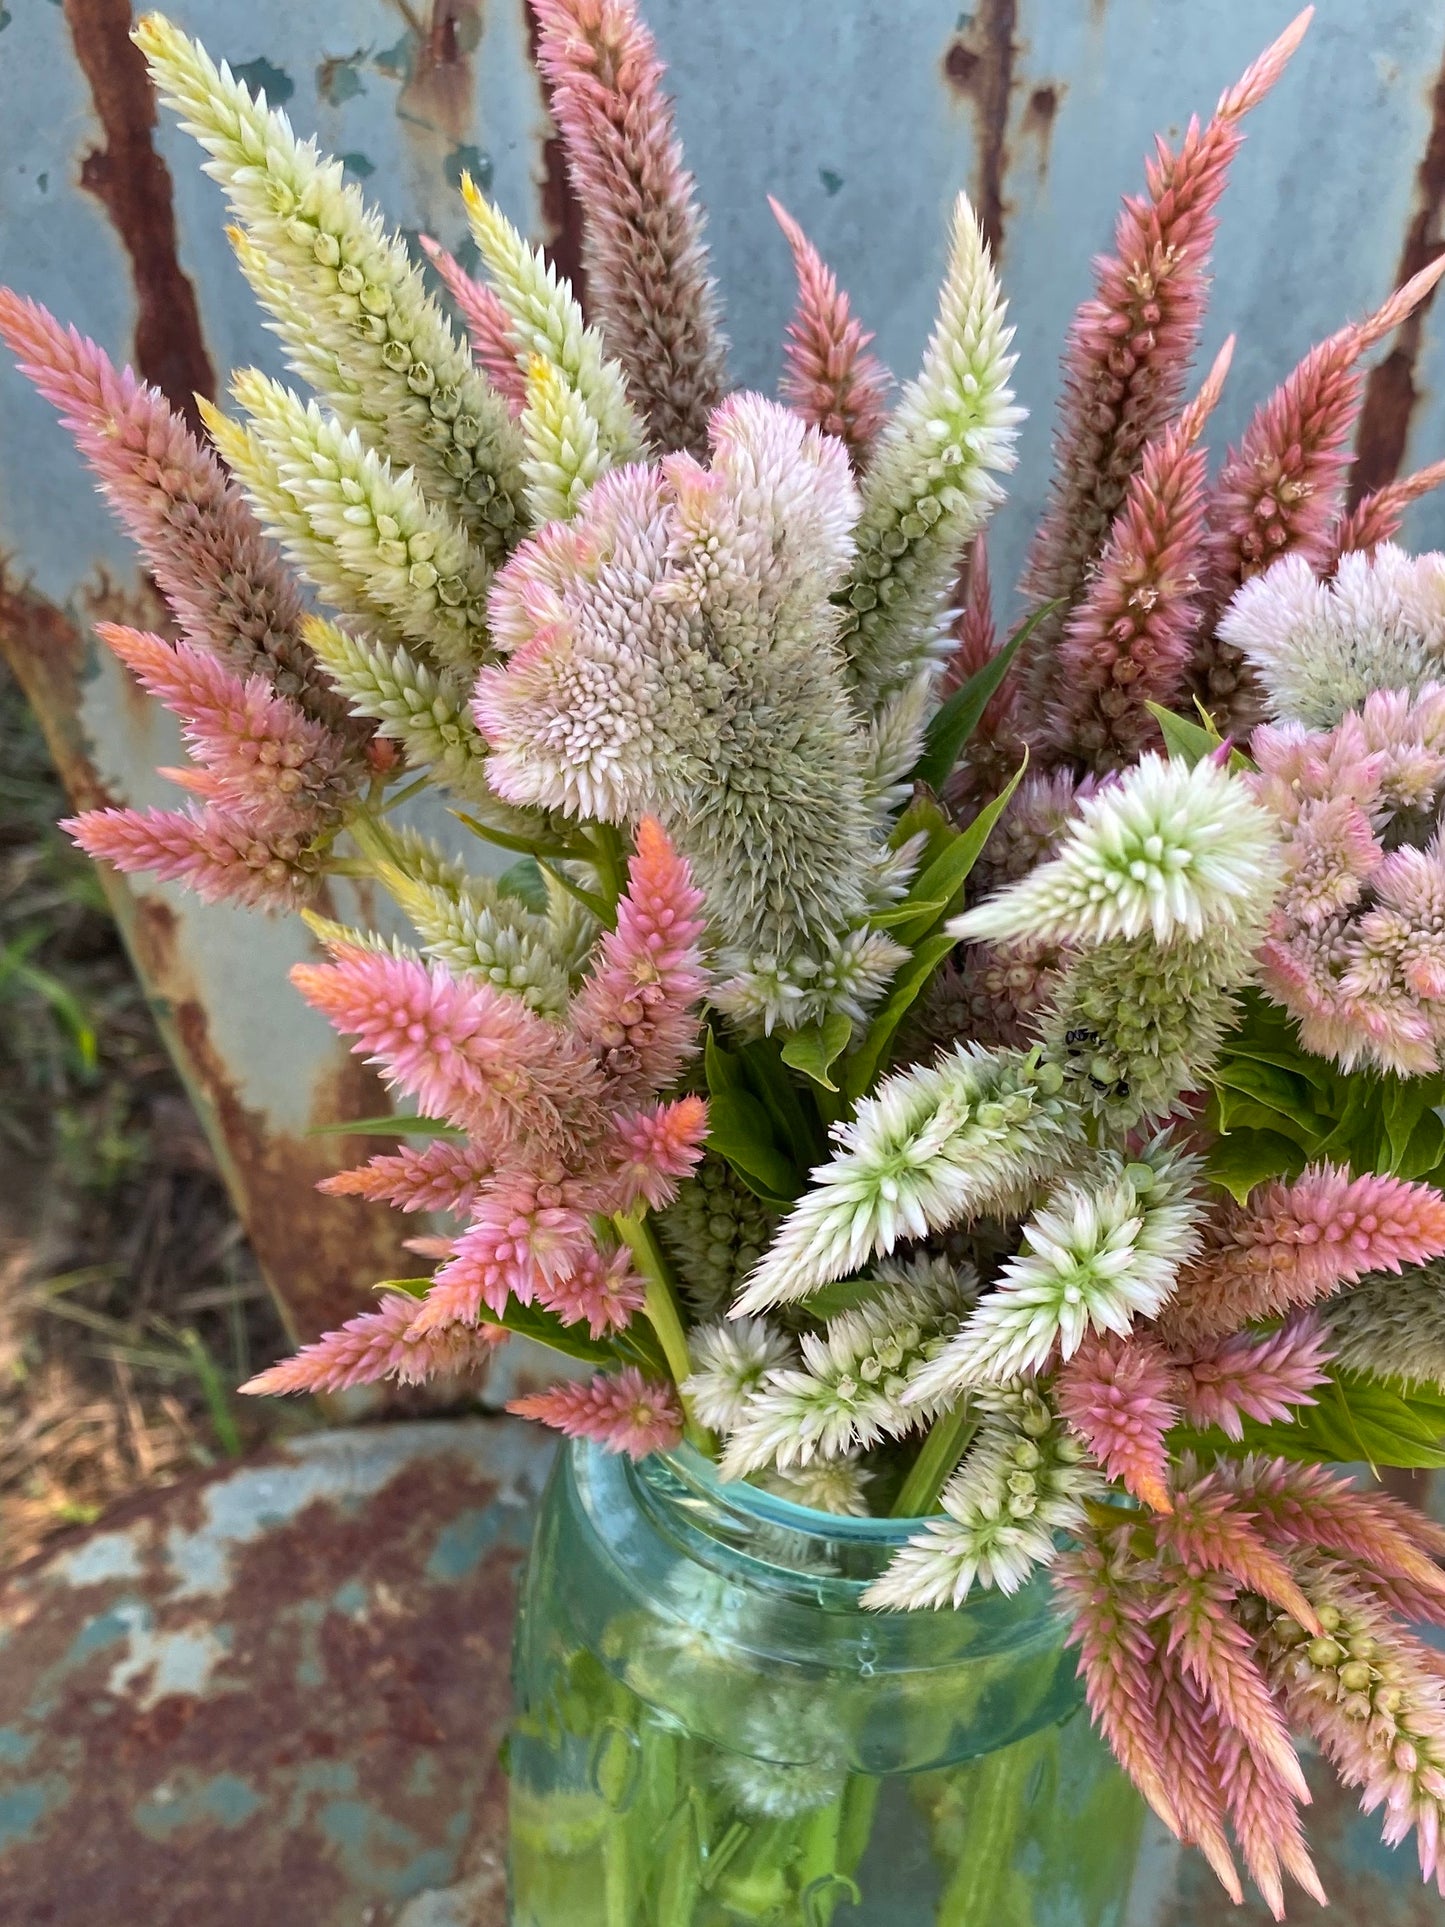 Pastel Mix Celosia seeds. Variety of pale colors and shapes